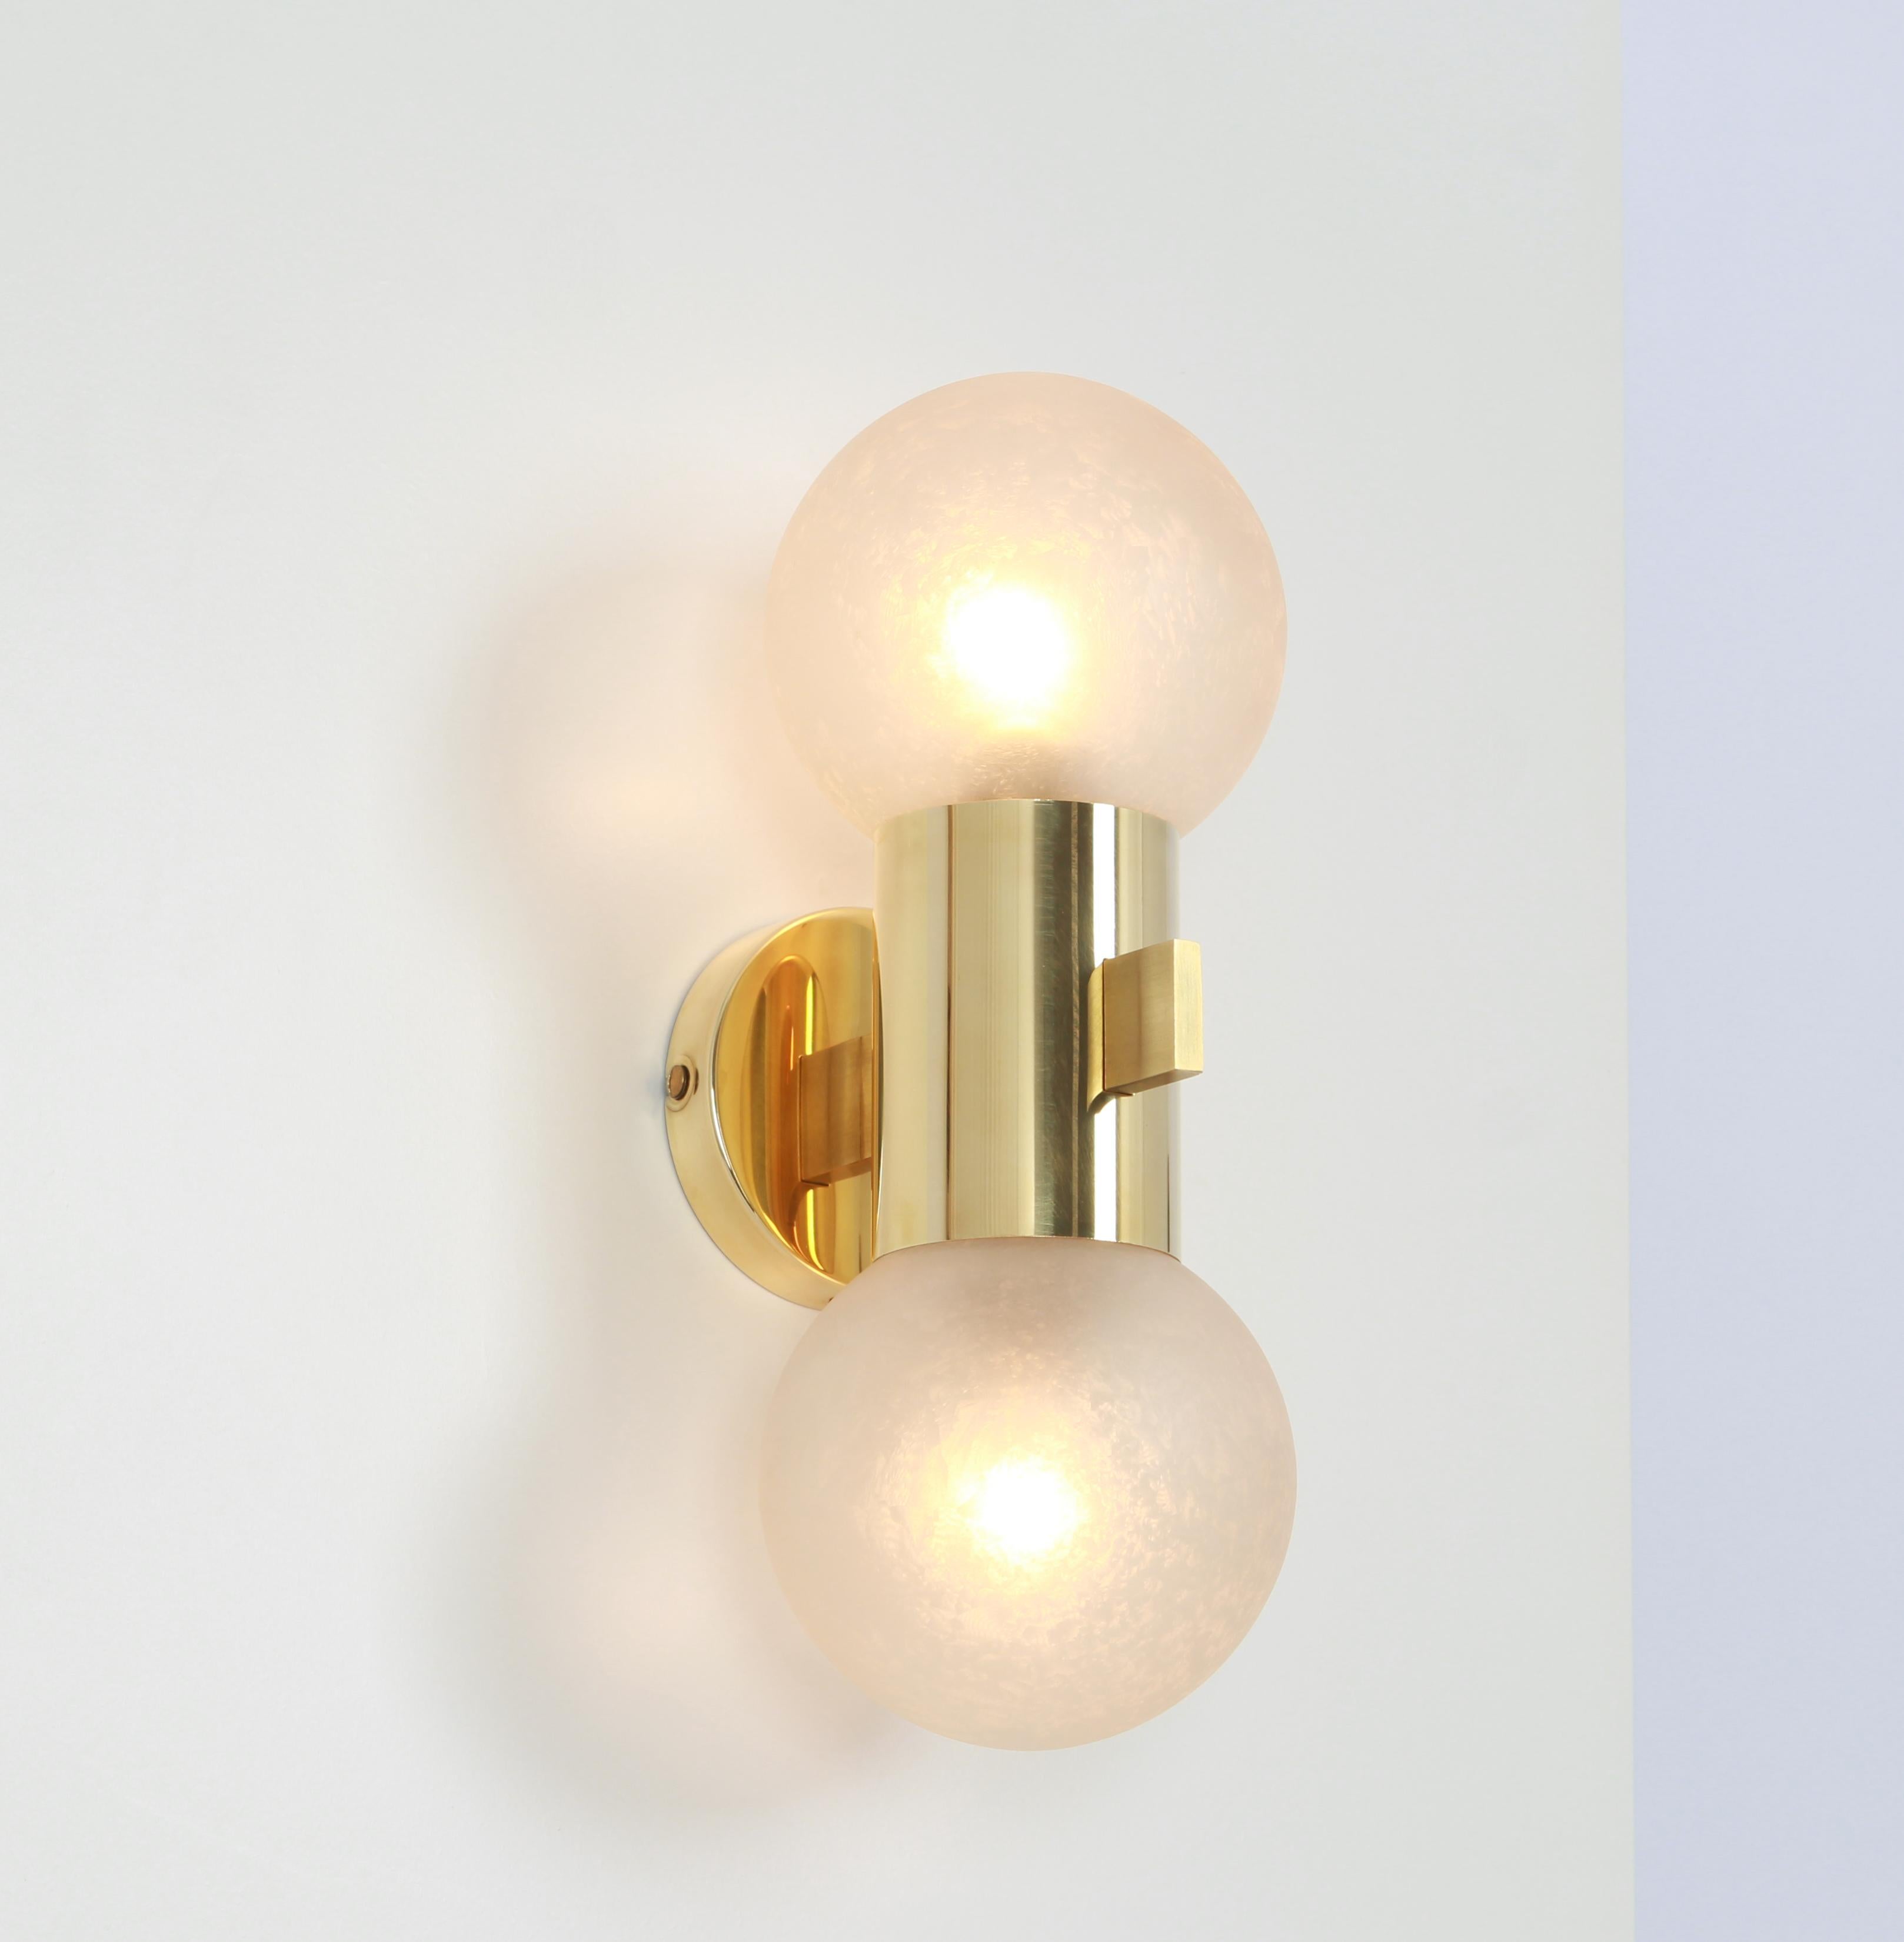 Pair of Brass and Satin Glass Sconces, Sciolari Stil, Germany, 1970s For Sale 2